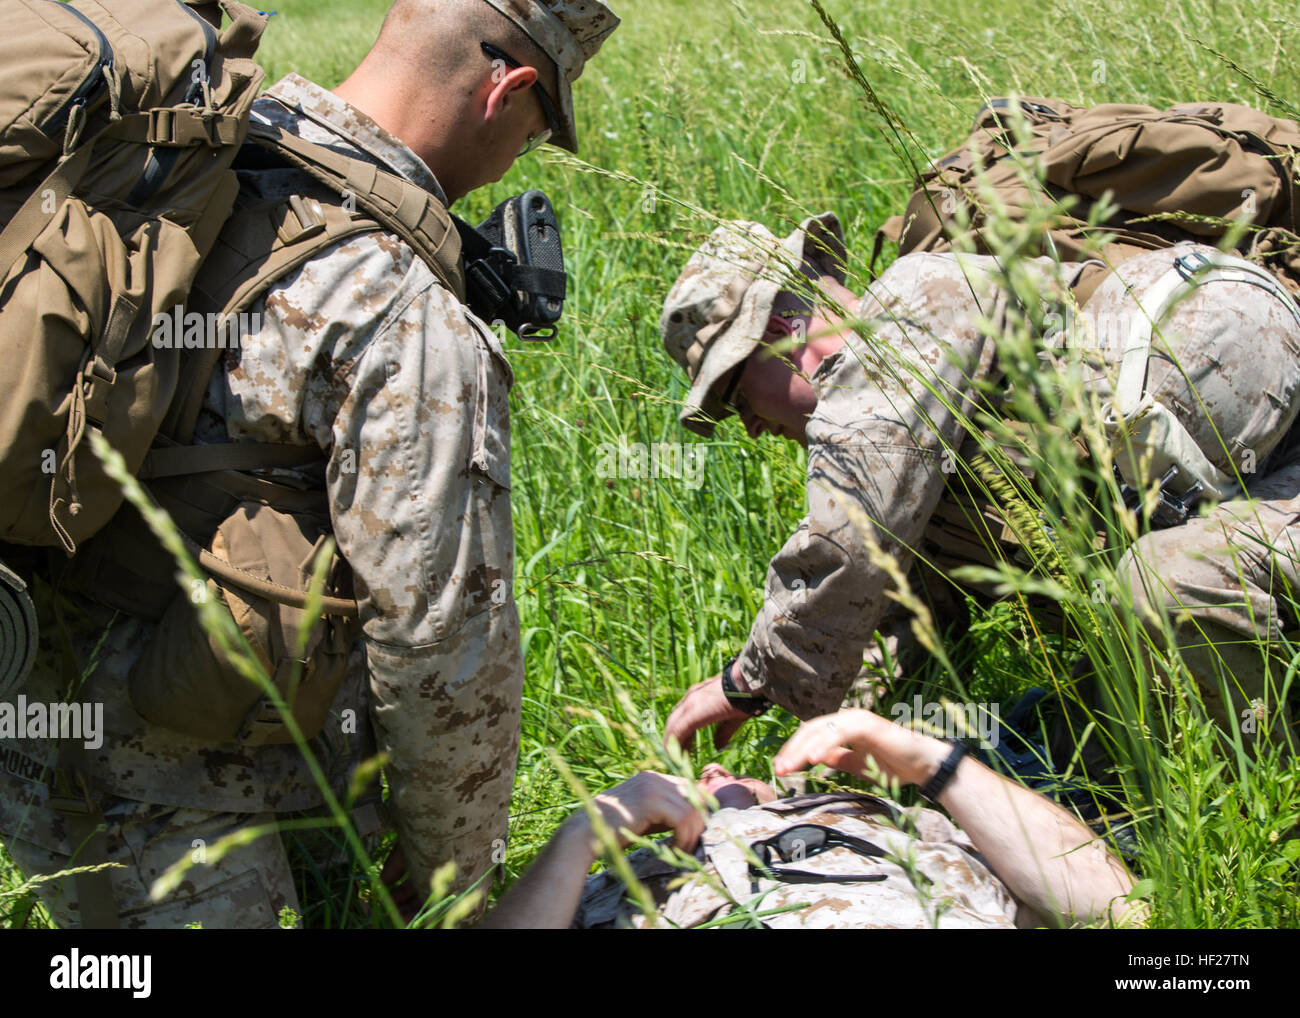 Marines with Fox Company, 2nd Battalion, 2nd Marine Regiment (2/2), conduct field medical treatment on a simulated casualty during embassy reinforcment training aboard Quantico, Va., June 11. The 26th Marine Expeditionary Unit, 2/2 and VMM-264 conducted embassy reinforcement training June 10 to 13, 2014. Marines conducted the training to prepare for possible real world scenarios. (U.S. Marine Corps photo by Lance Cpl. Joshua W. Brown/Released) Mission Readiness Exercise 140611-M-AW179-034 Stock Photo